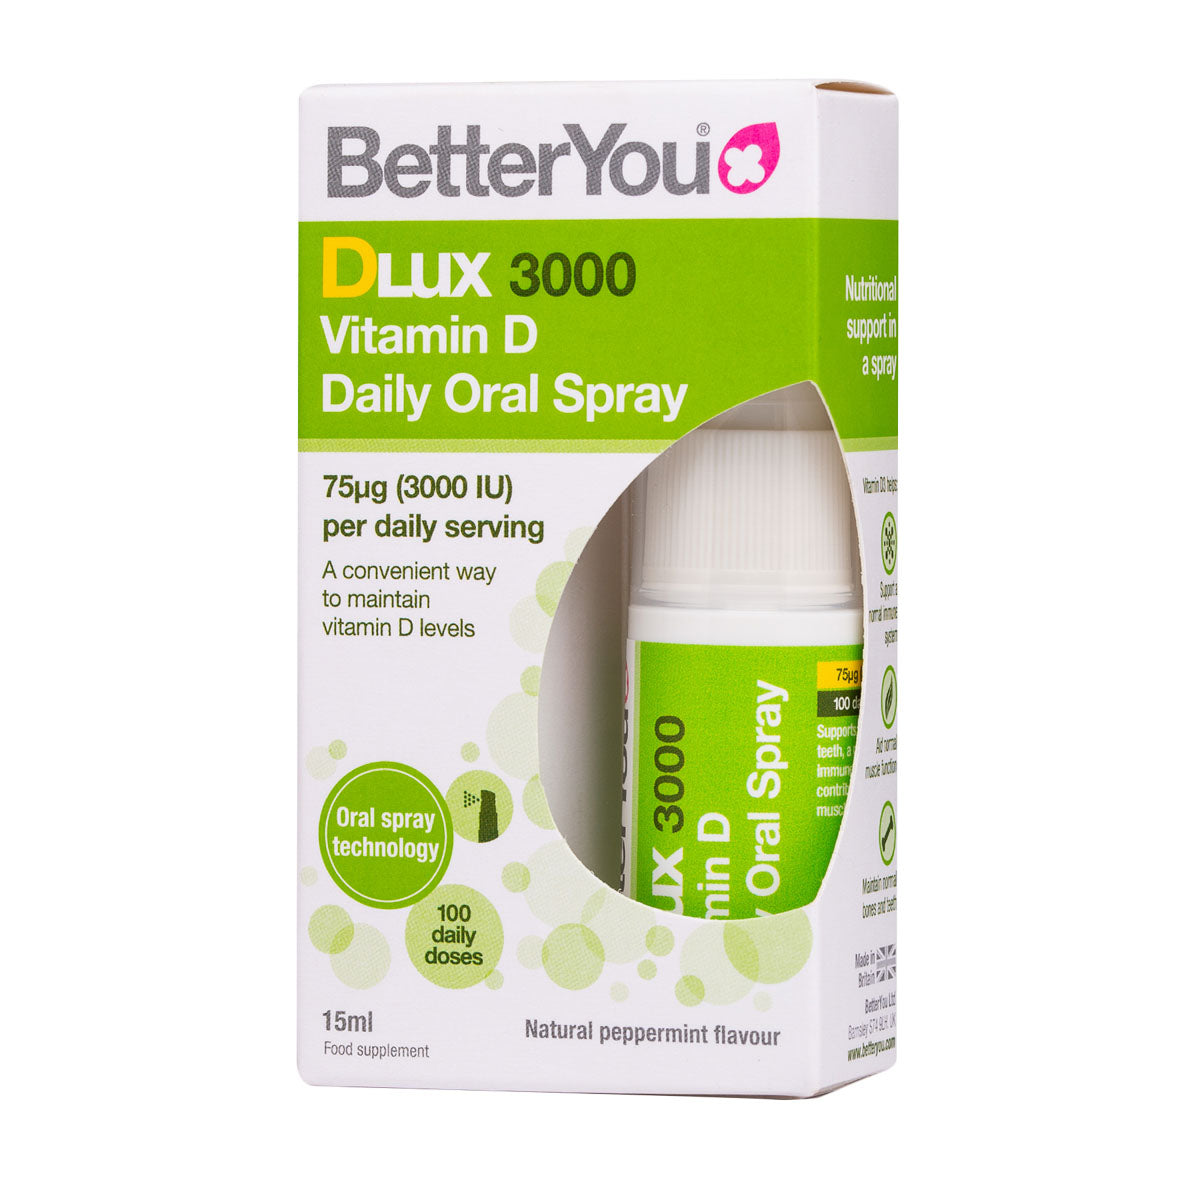 Vitamin D3 Spray D-Lux 3000 (15ml) | Better You | Raw Living UK | Supplements | BetterYou DLux3000 Oral Peppermint Vitamin D3 spray by Jan de Vries is a highly effective way to get your D3, which is very important for the body to function.